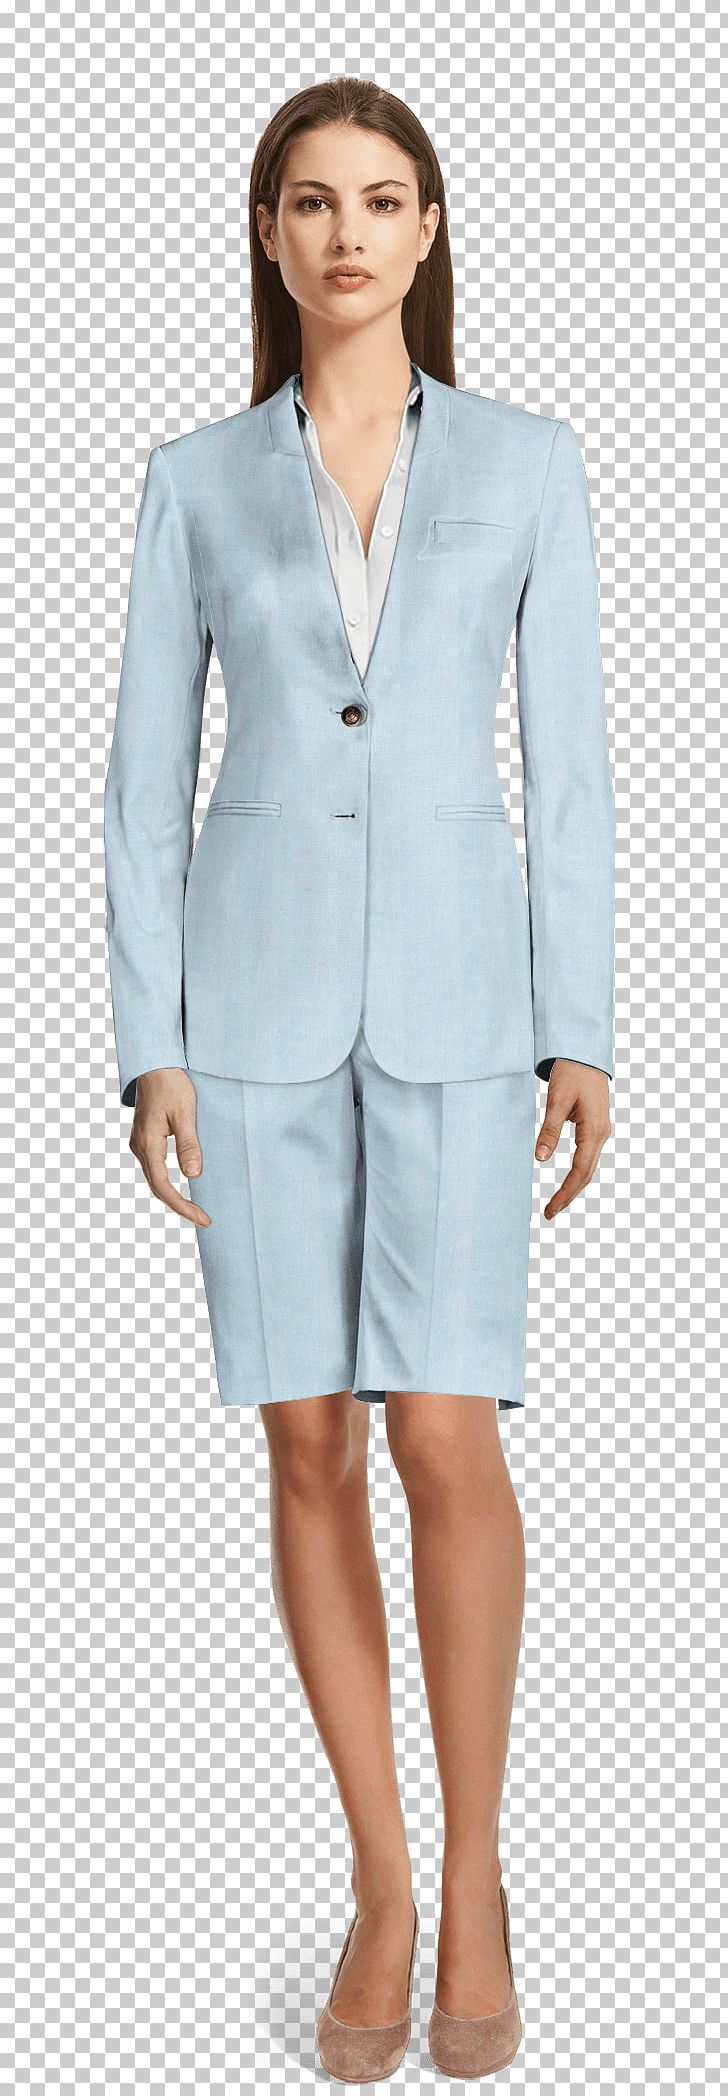 Suit Clothing Jacket Blazer Sleeve PNG, Clipart, Blazer, Blue, Clothing, Doublebreasted, Dress Free PNG Download